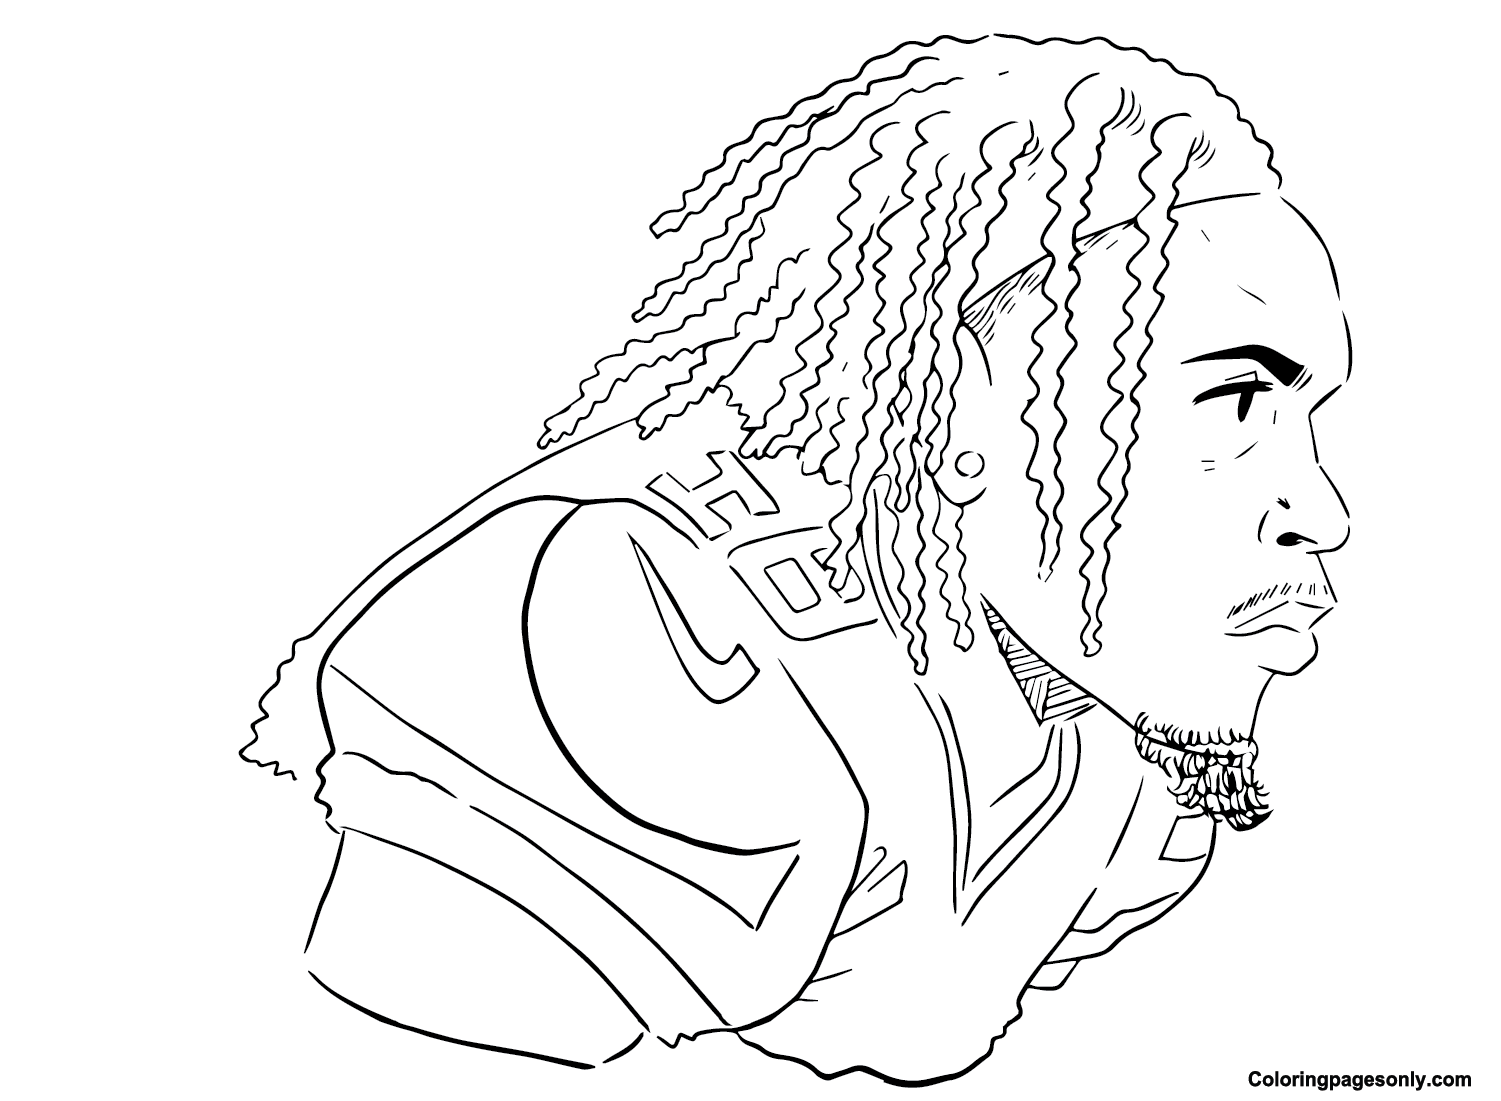 Justin Jefferson Image Coloring Page Jefferson Coloring Page Page For